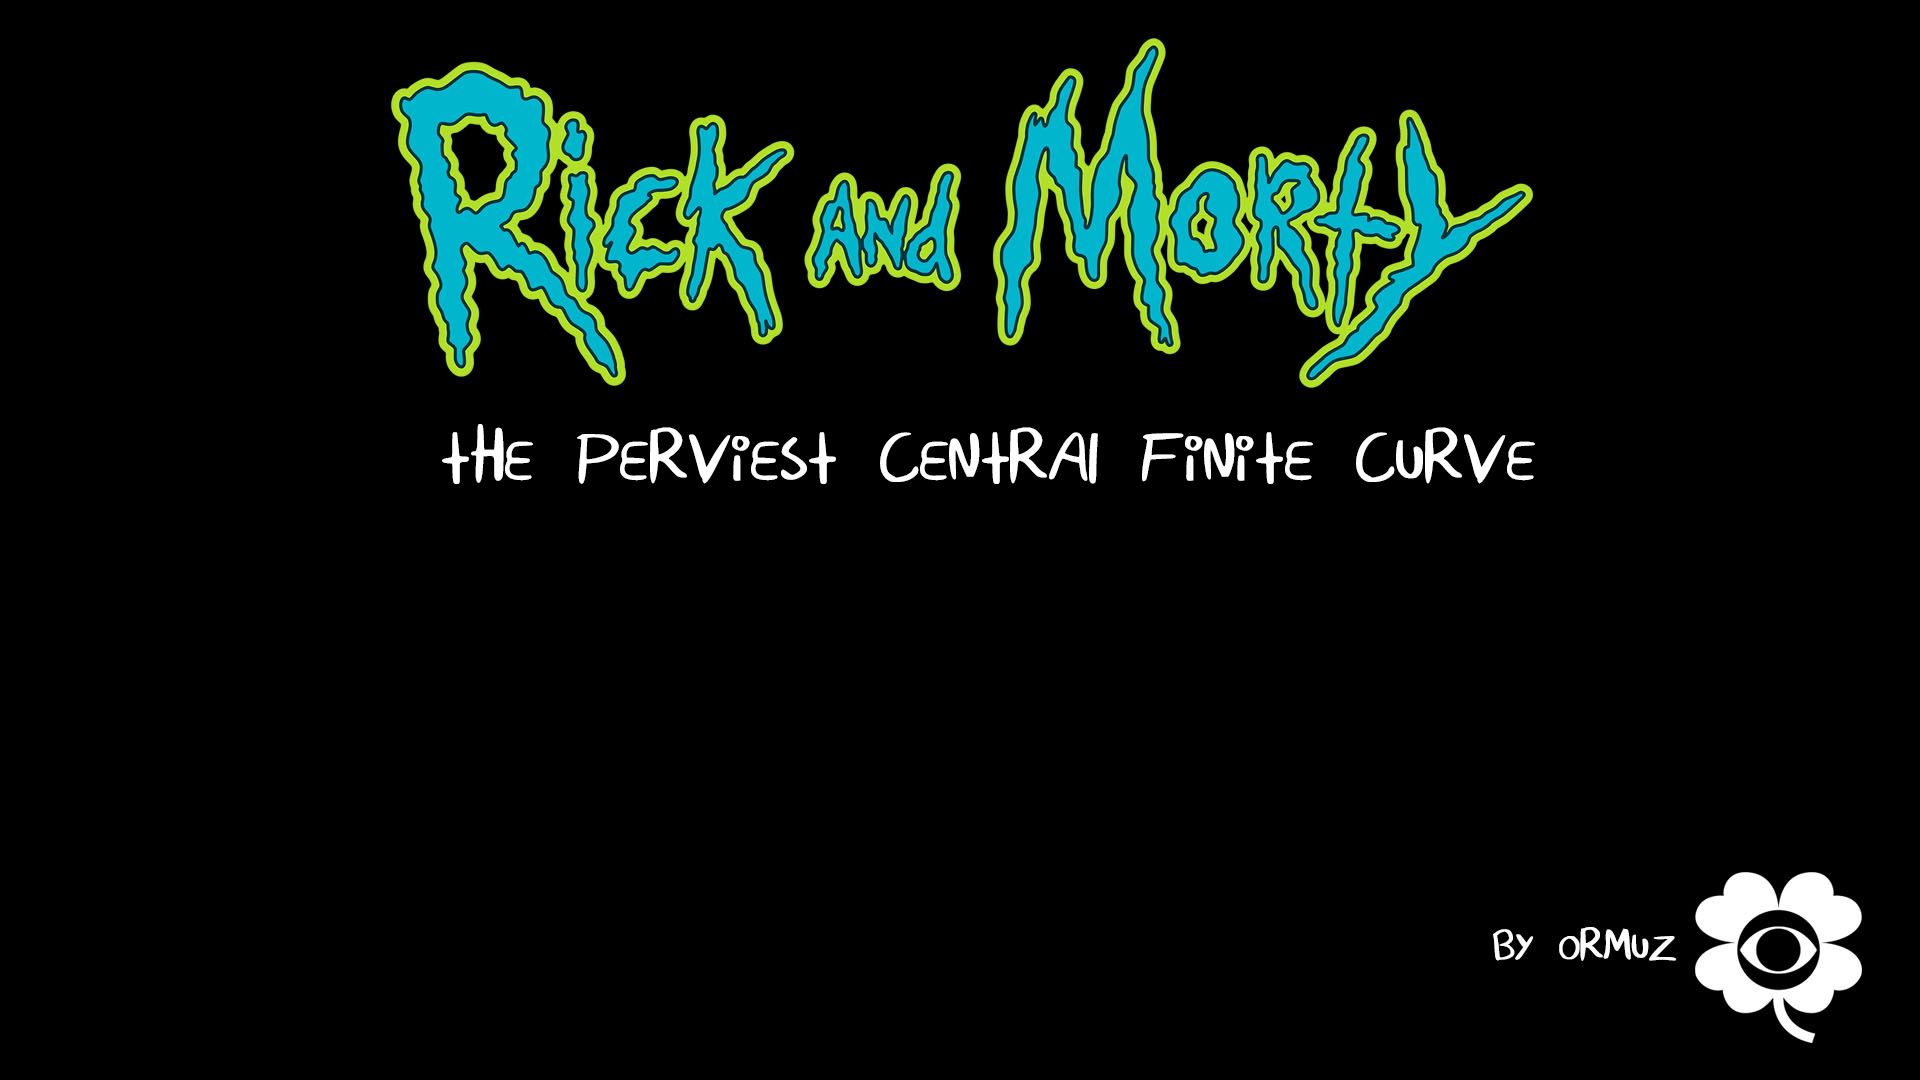 Rick And Morty – The Pervetiest Central Finite Curve [Ongoing] - Version: 2.0